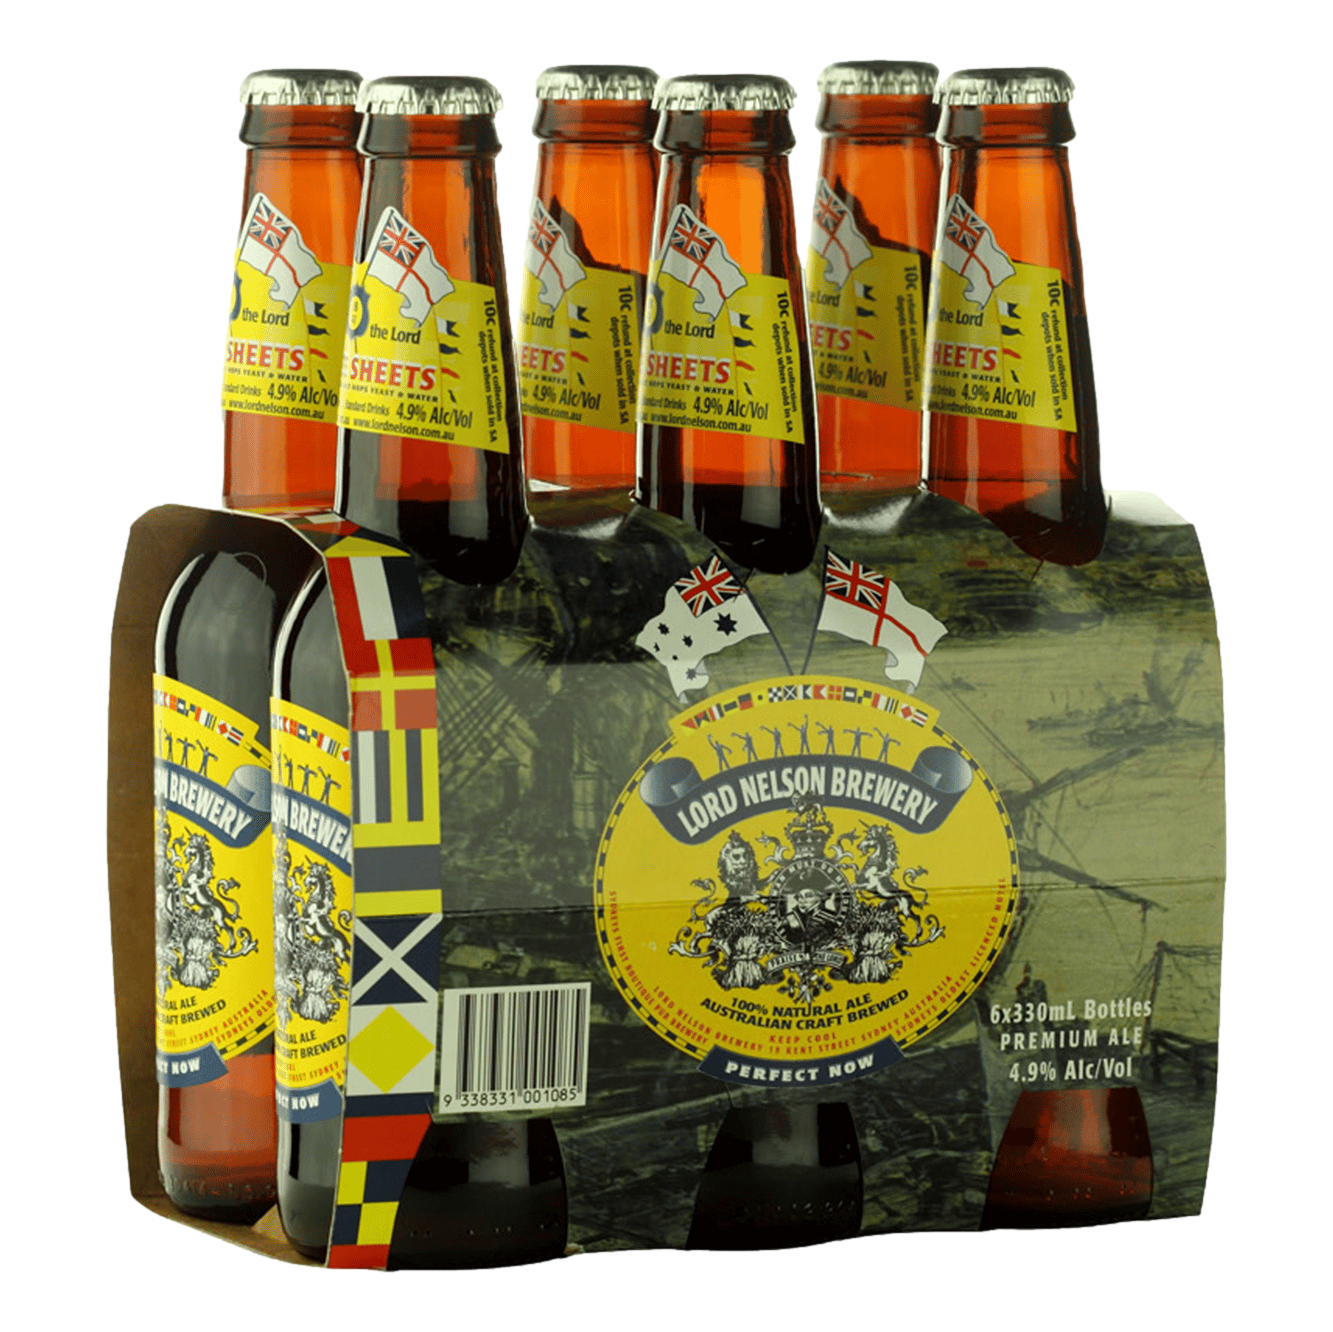 Lord Nelson Three Sheets Pale Ale 330ml Bottle 6 Pack